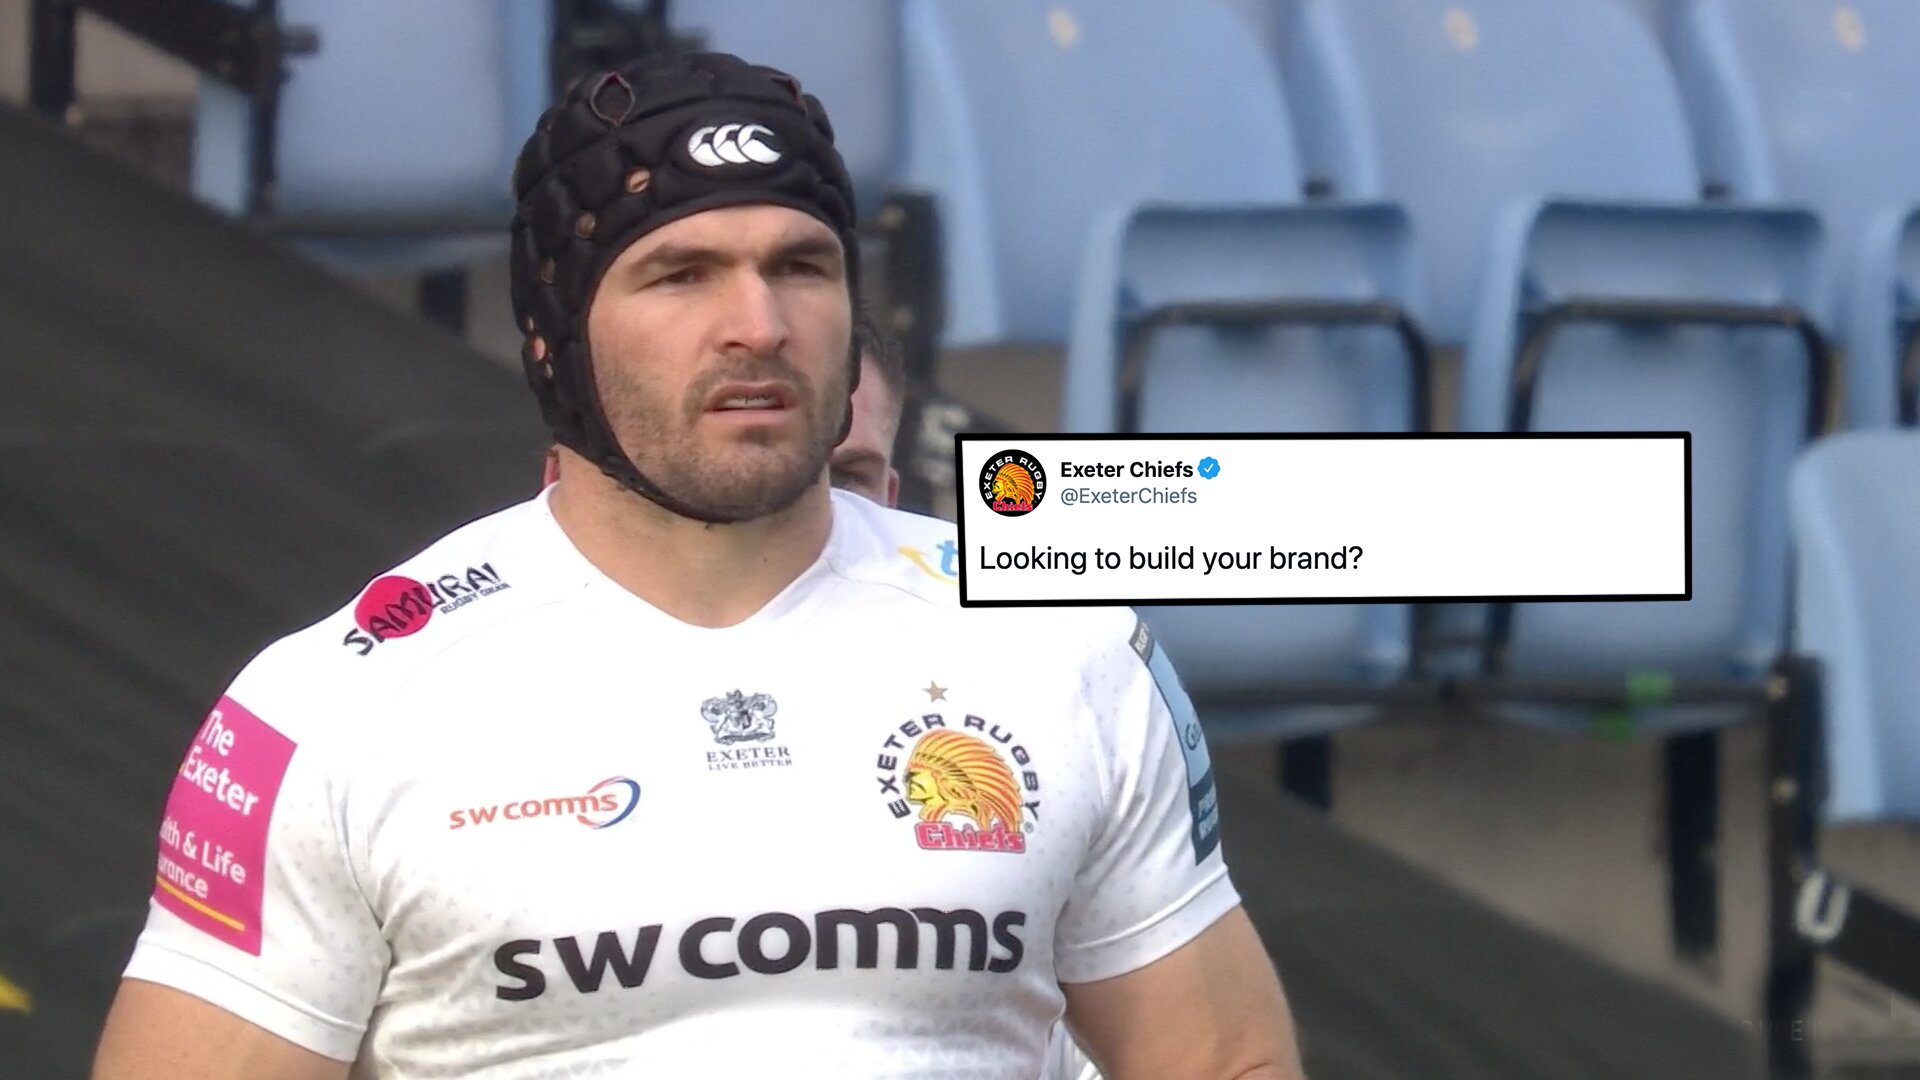 Lack of sponsorship for Exeter Chiefs forces them to post bizarre message on social media